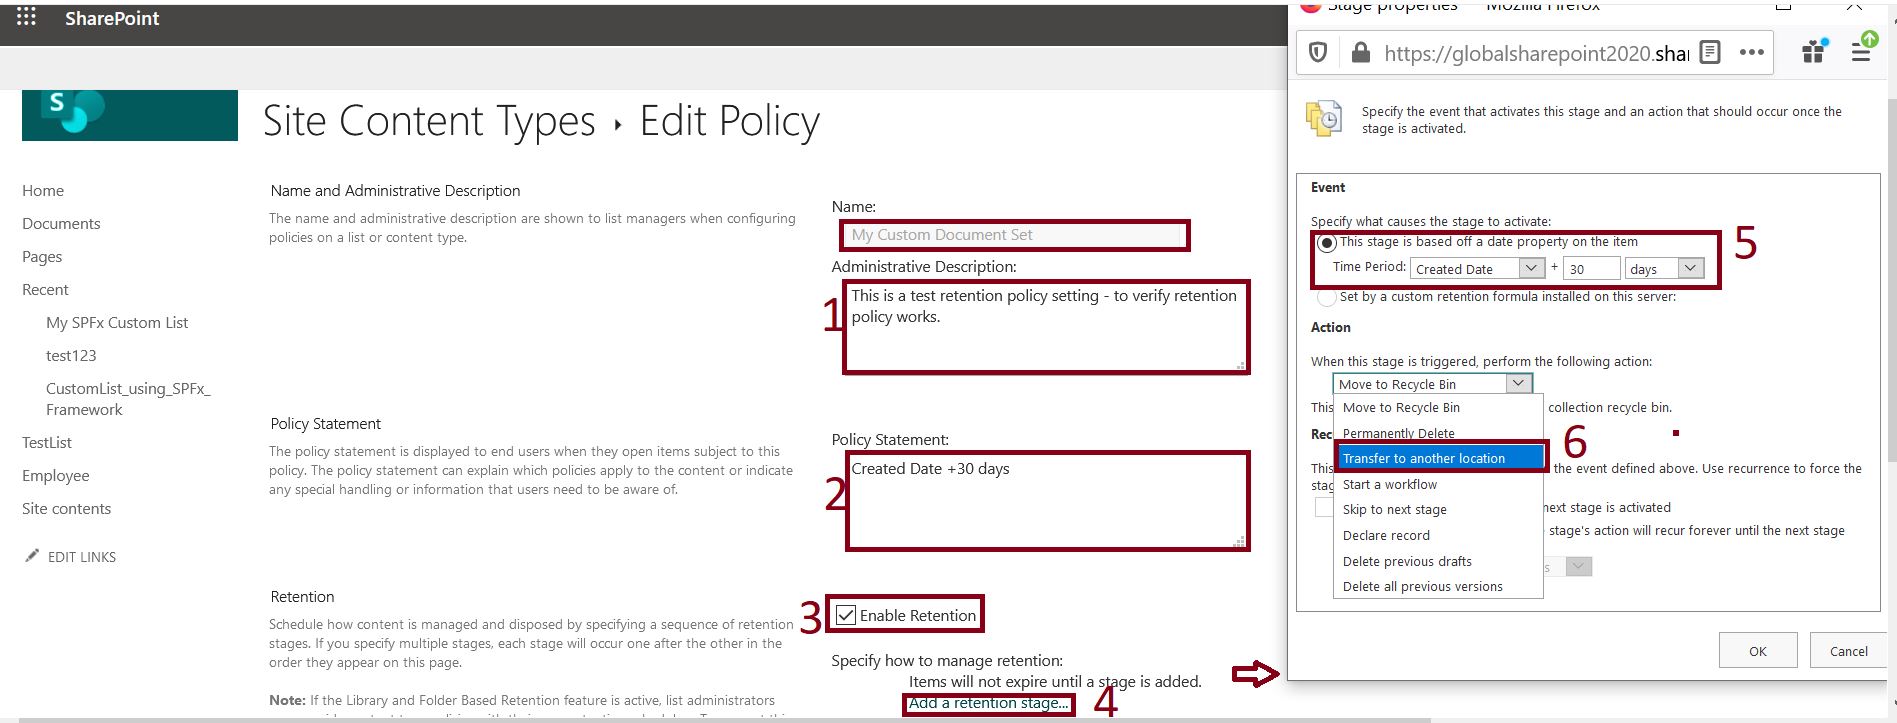 Add retention policy statement configuration in SharePoint Online content type